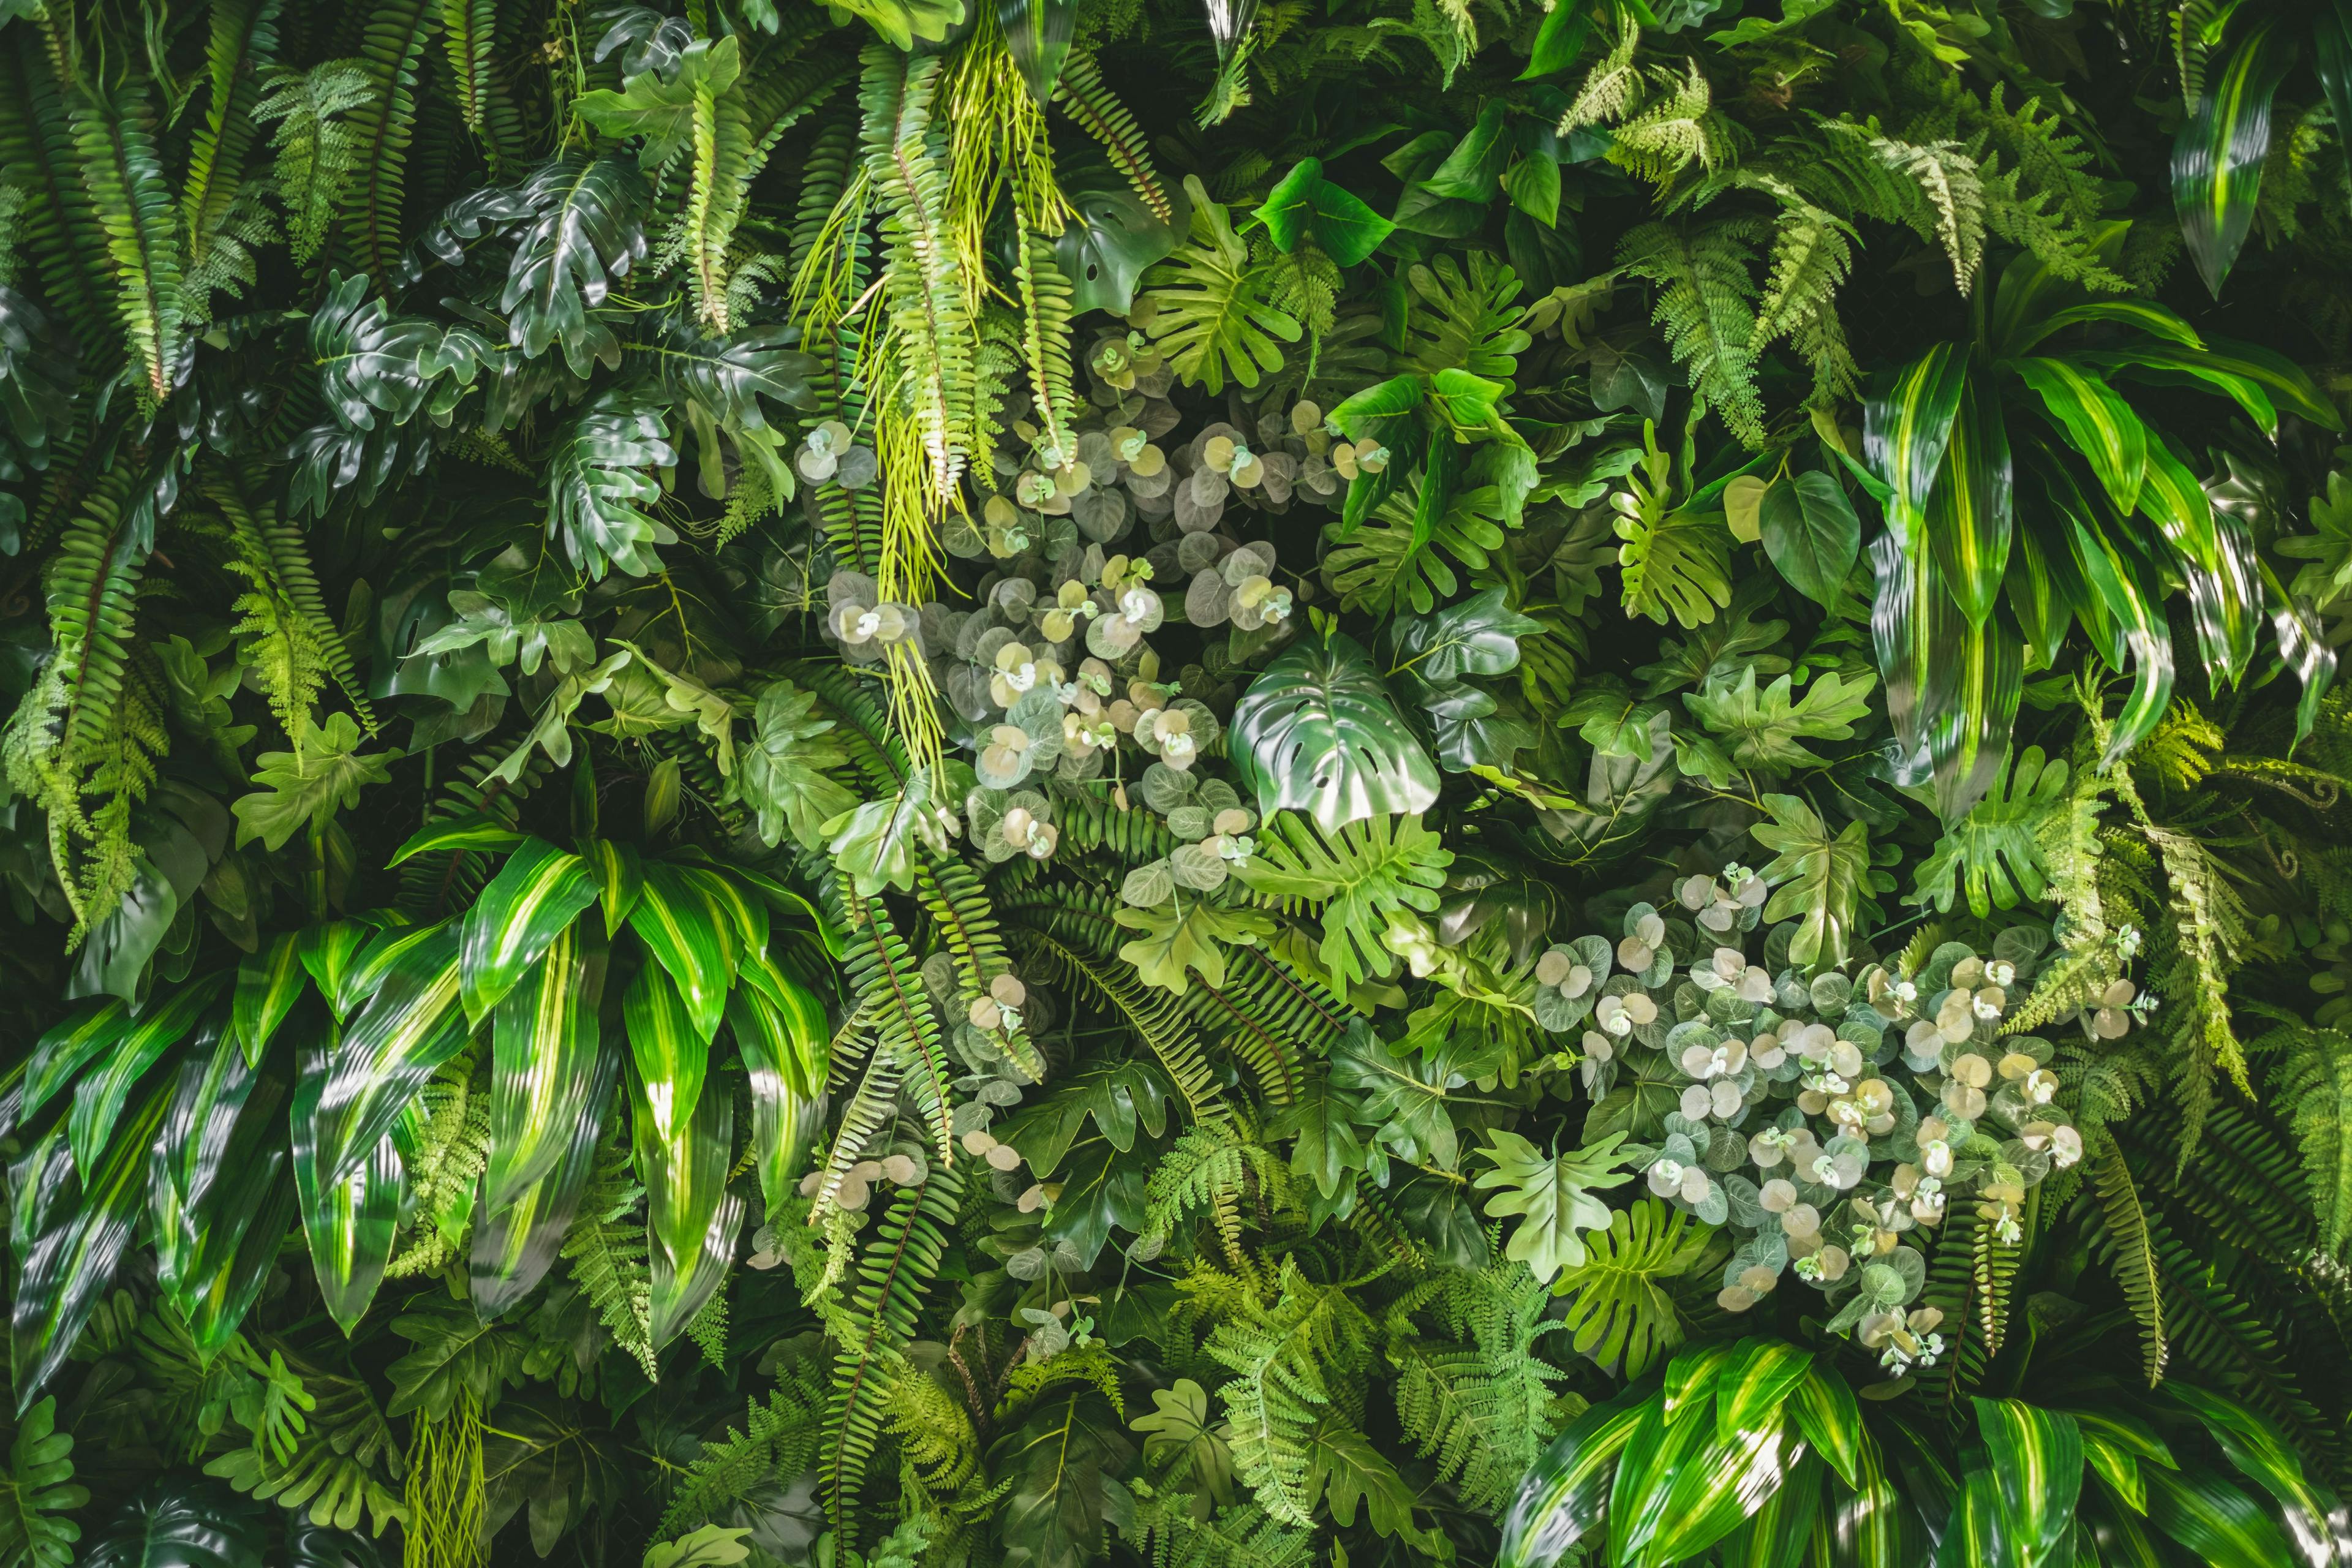 walll full of variety of green leaf topical plants some with flowers for background use. | Image Credit: © mrwinn - stock.adobe.com